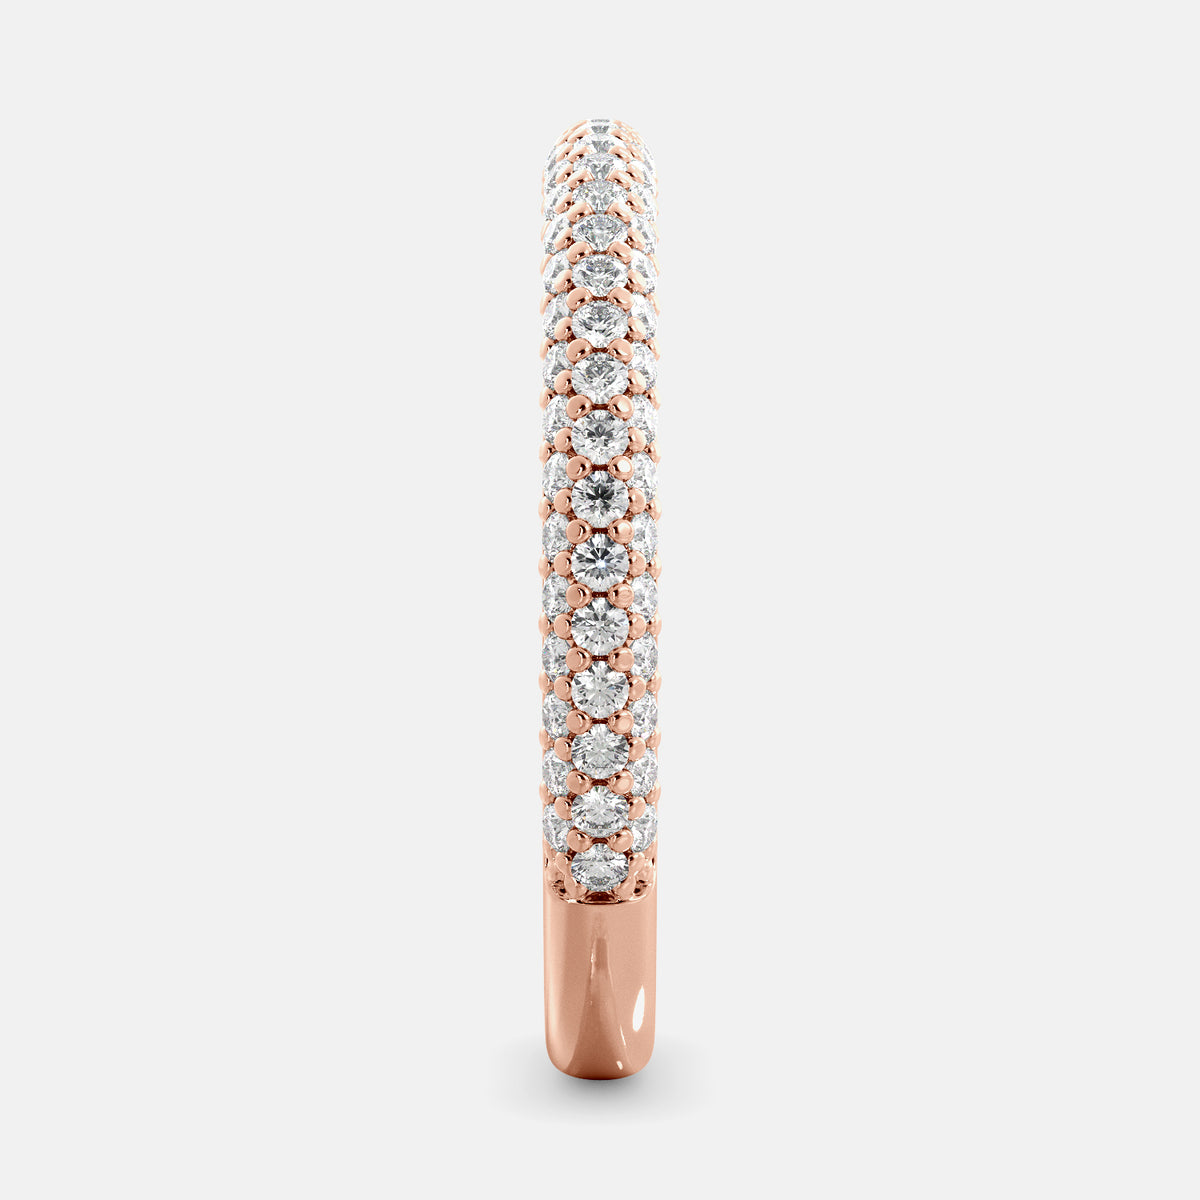 Forevermore Pavé Eternity Band